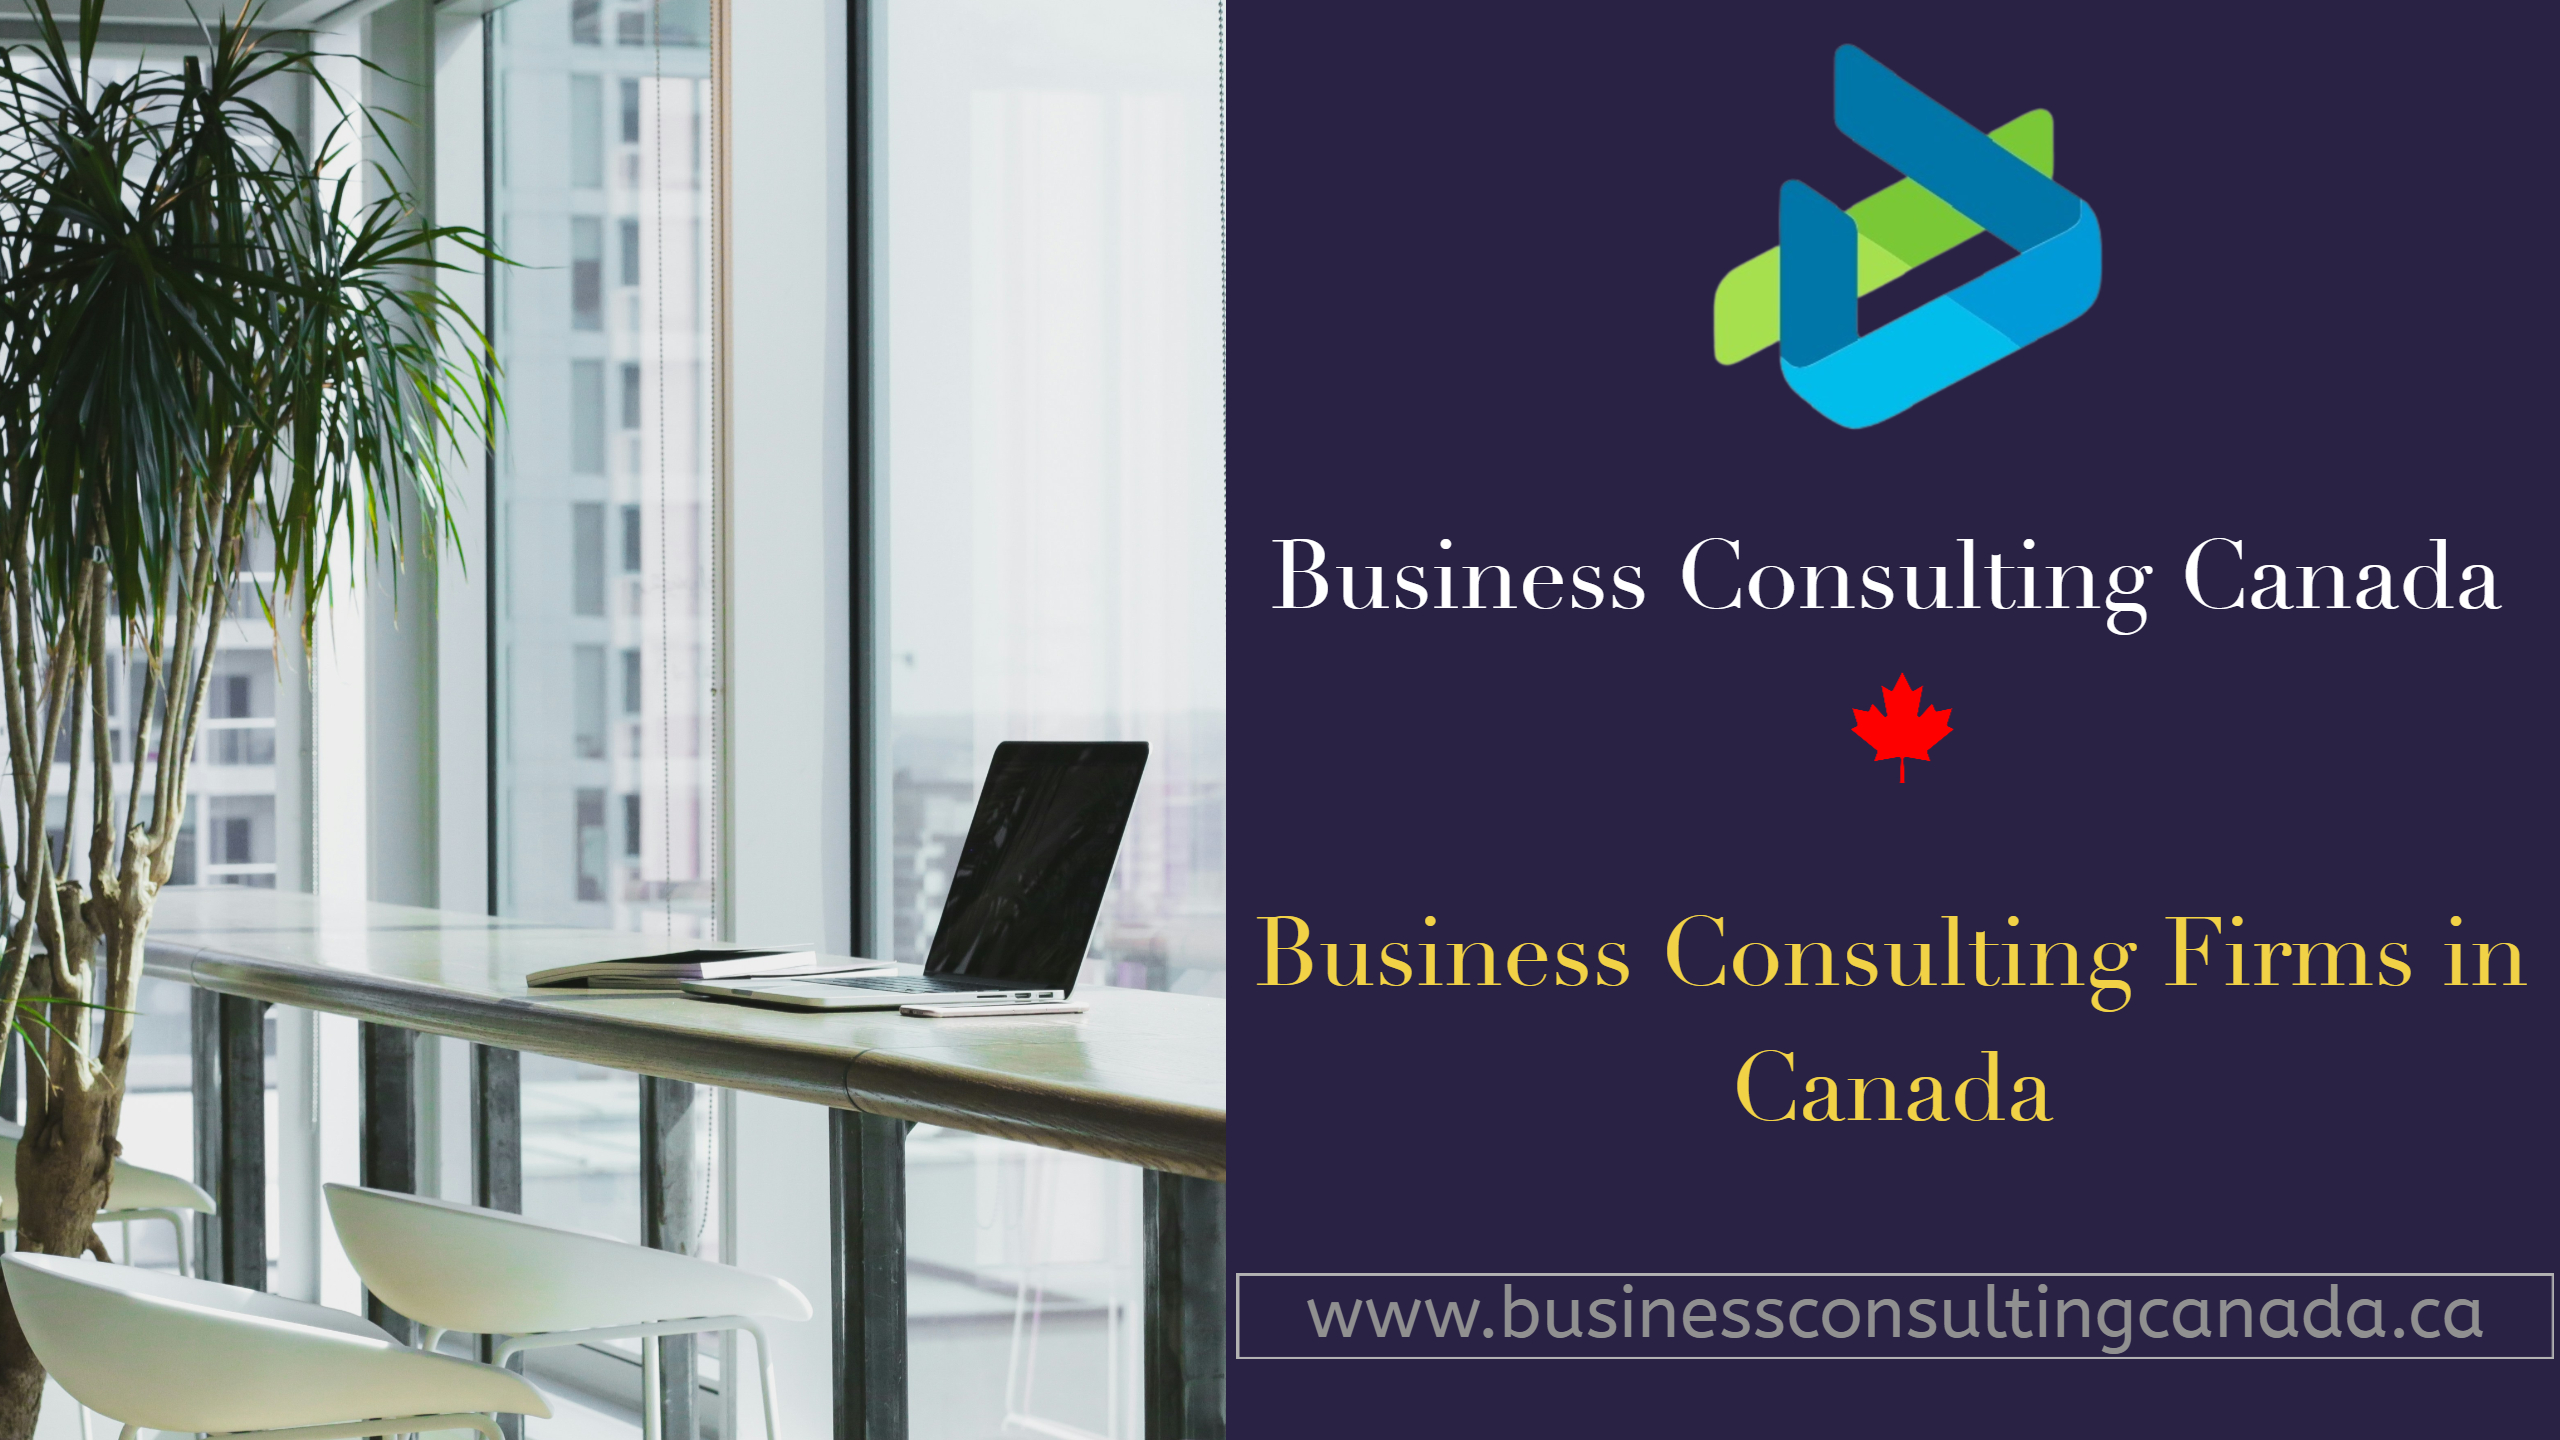 Business Consulting Firms in Canada